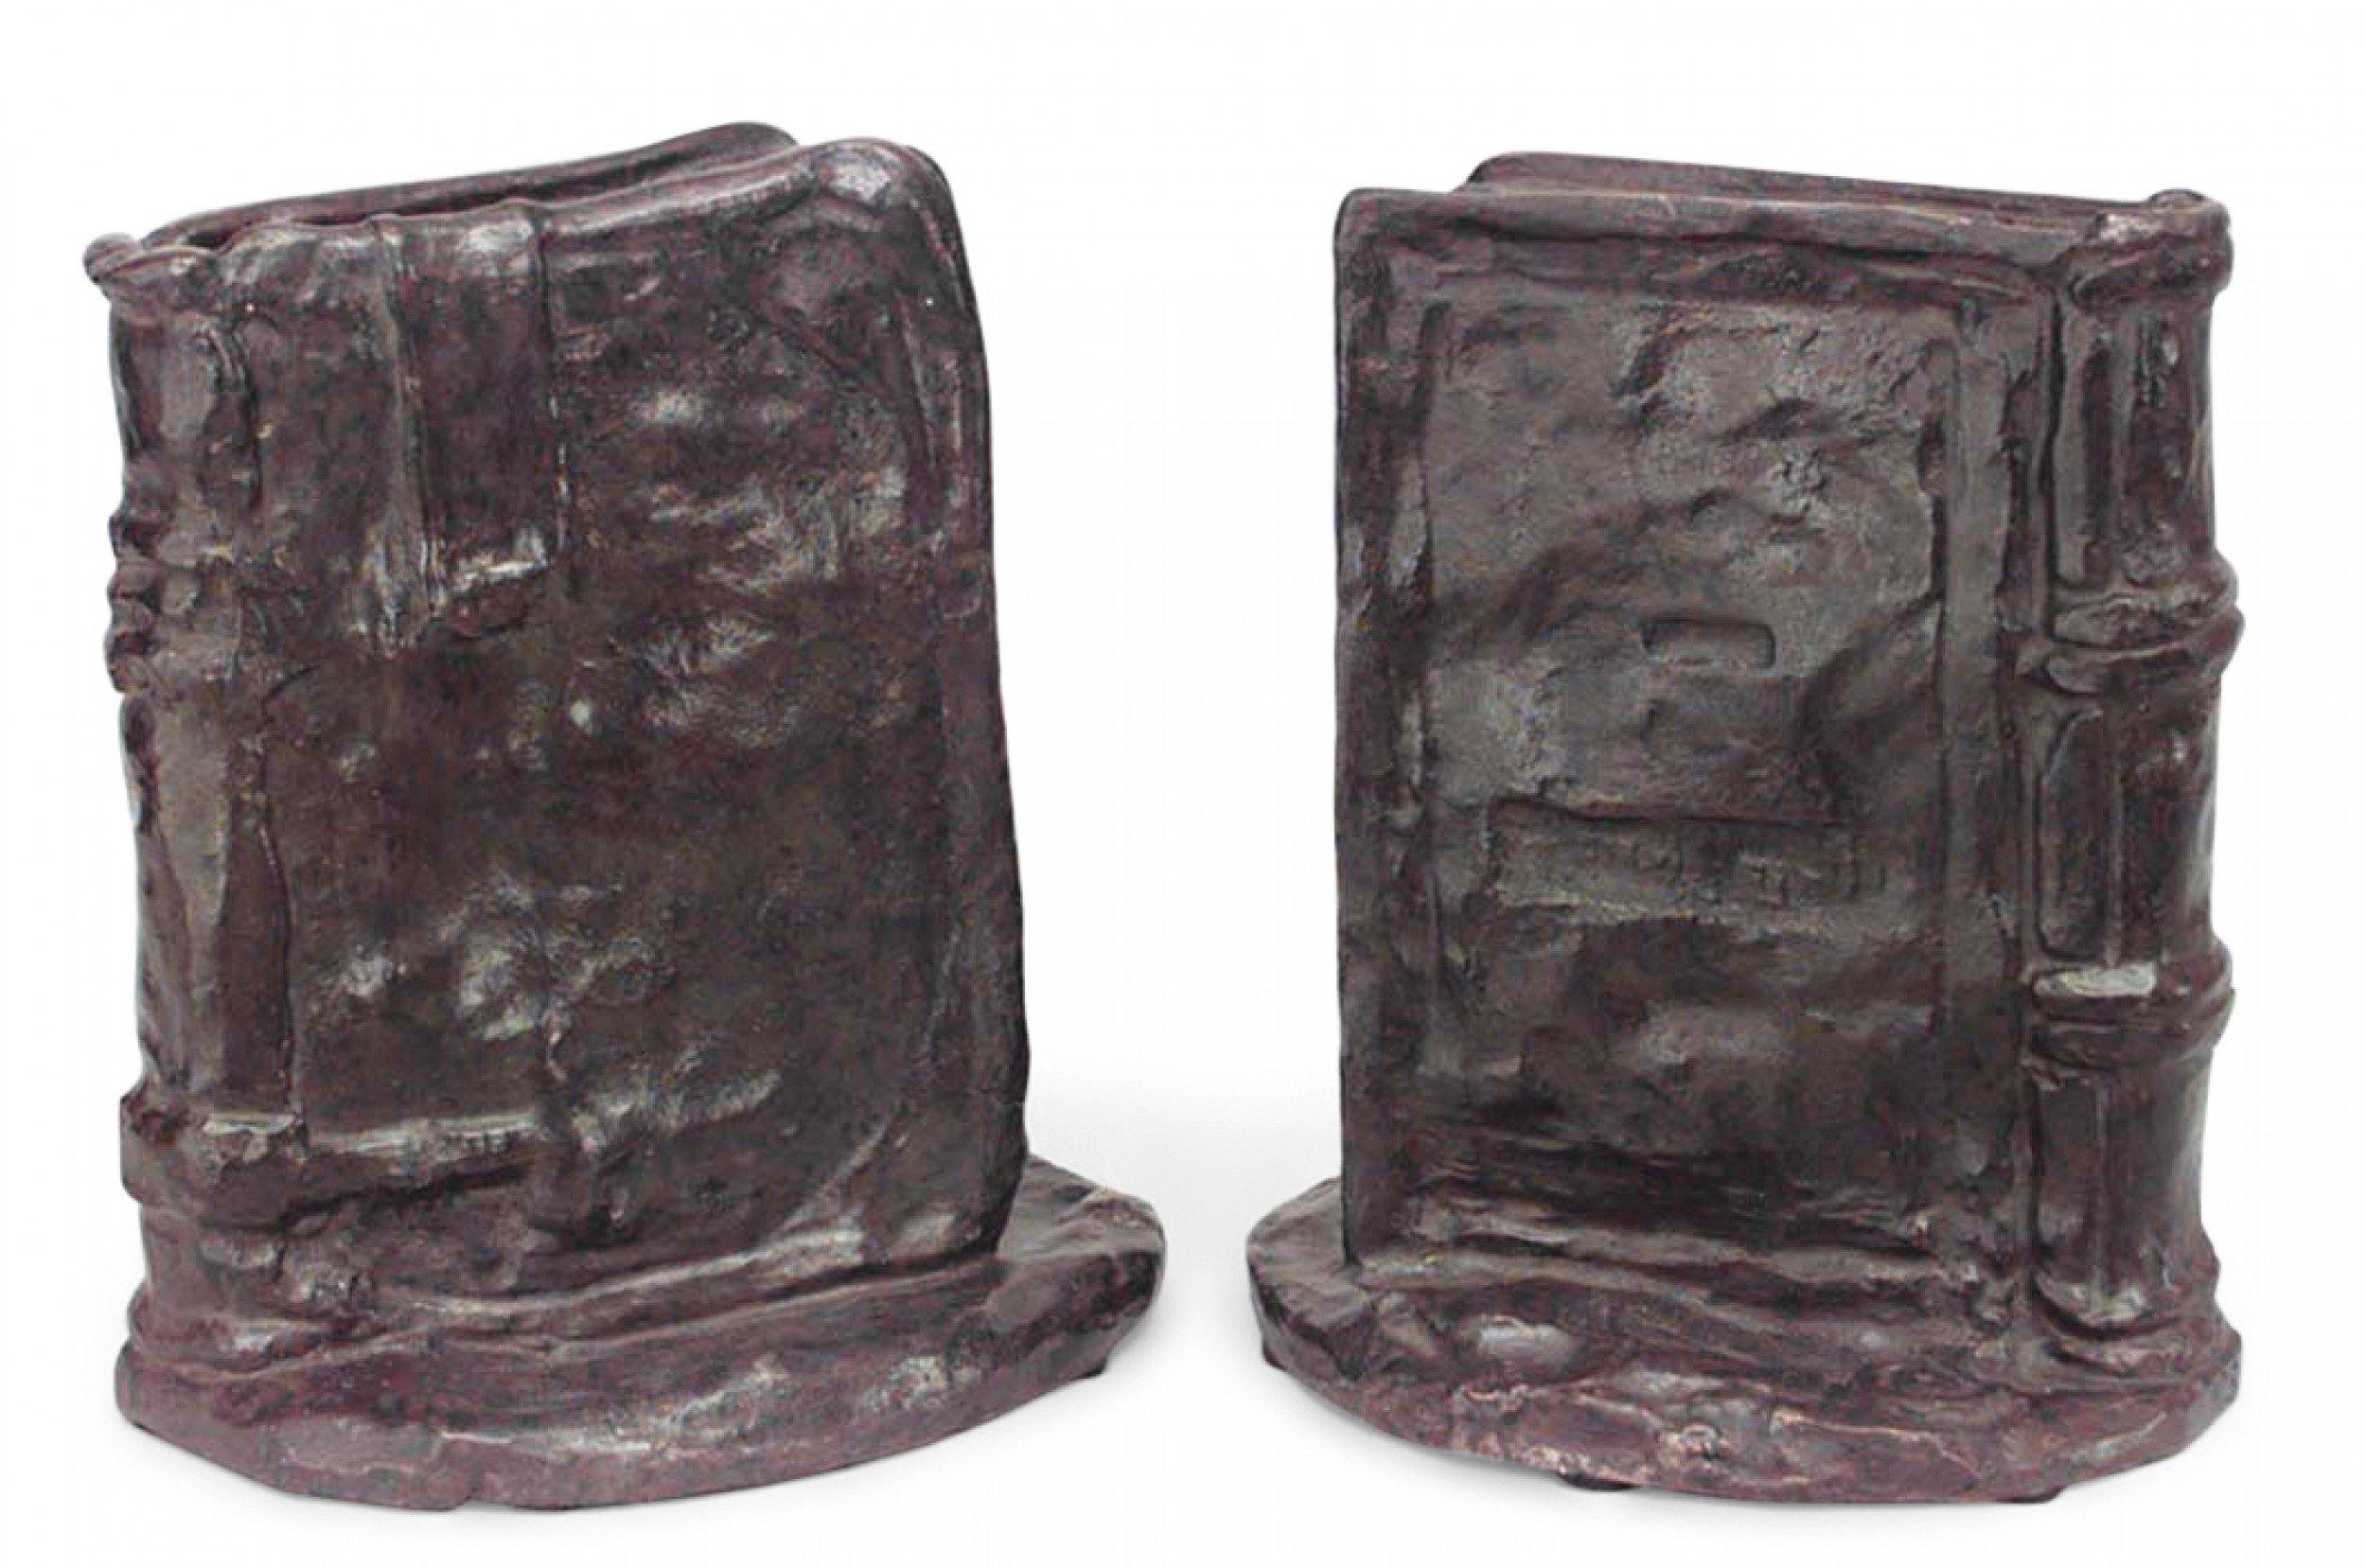 Pair of American Victorian bronze open book design bookends (various marks: 